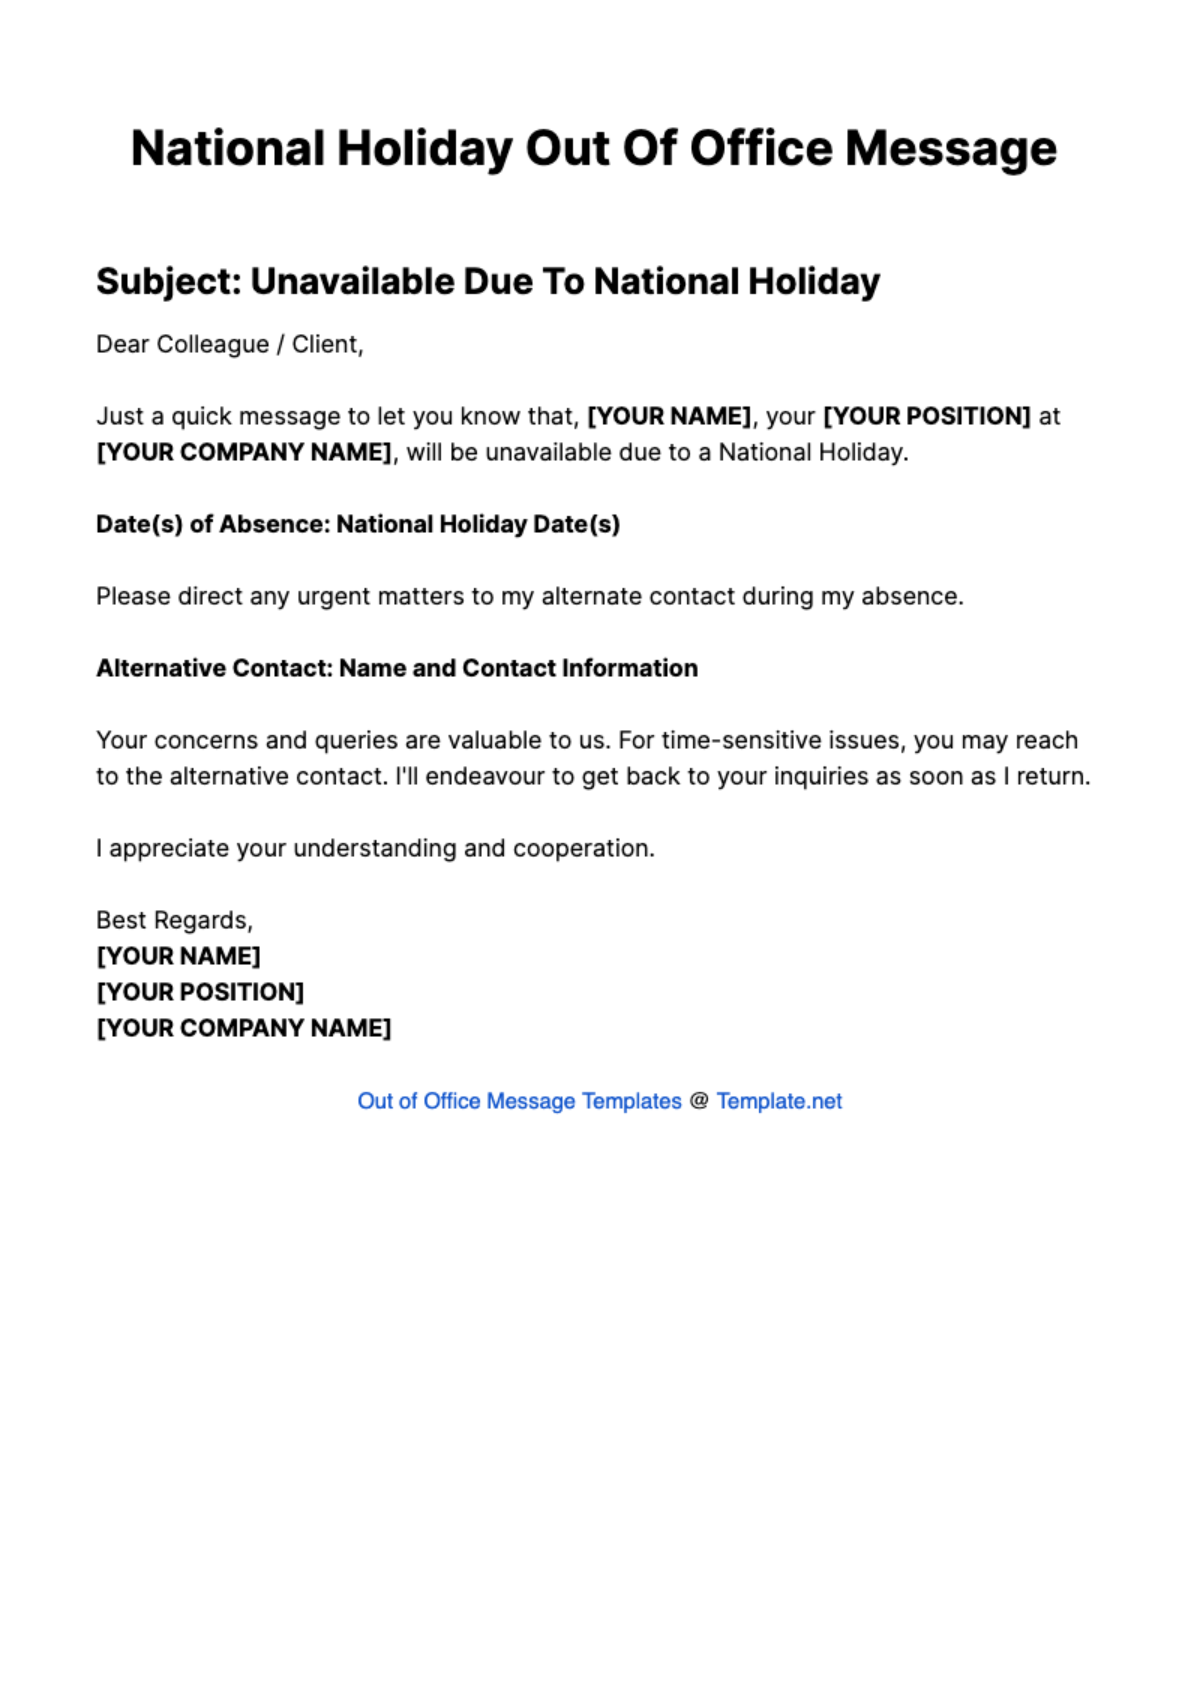 Free National Holiday Out Of Office Message Template